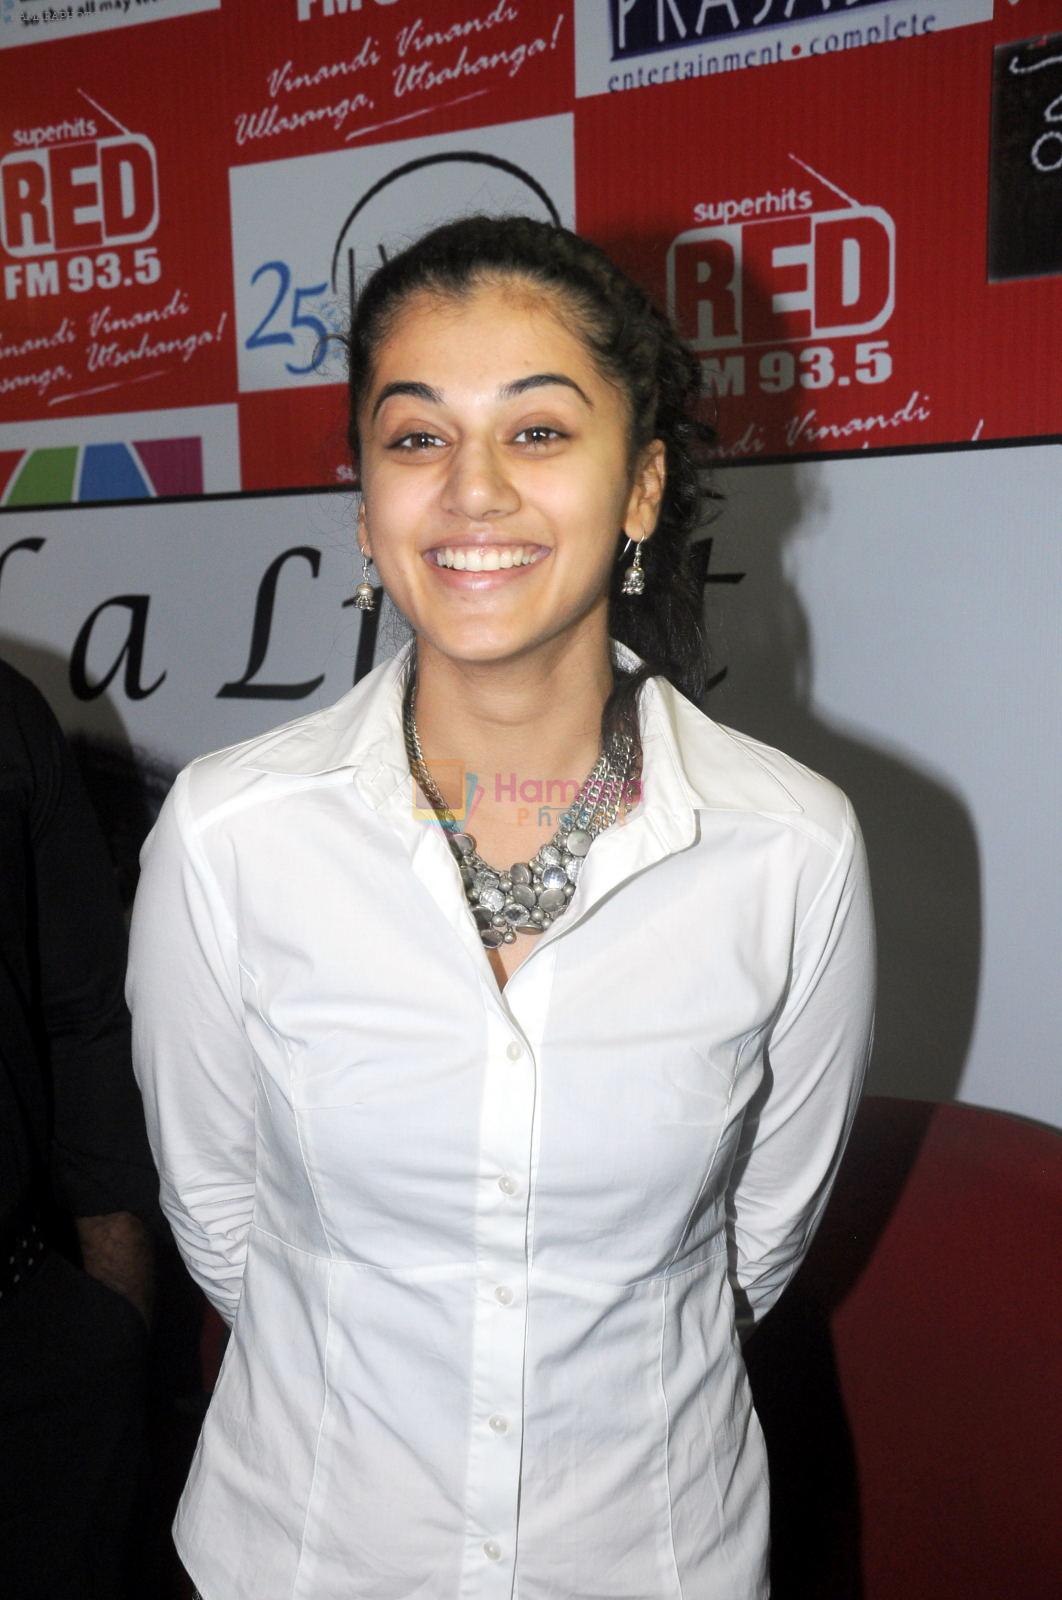 Taapsee Pannu attends Red FM promoting Mogudu movie on 28th October 2011